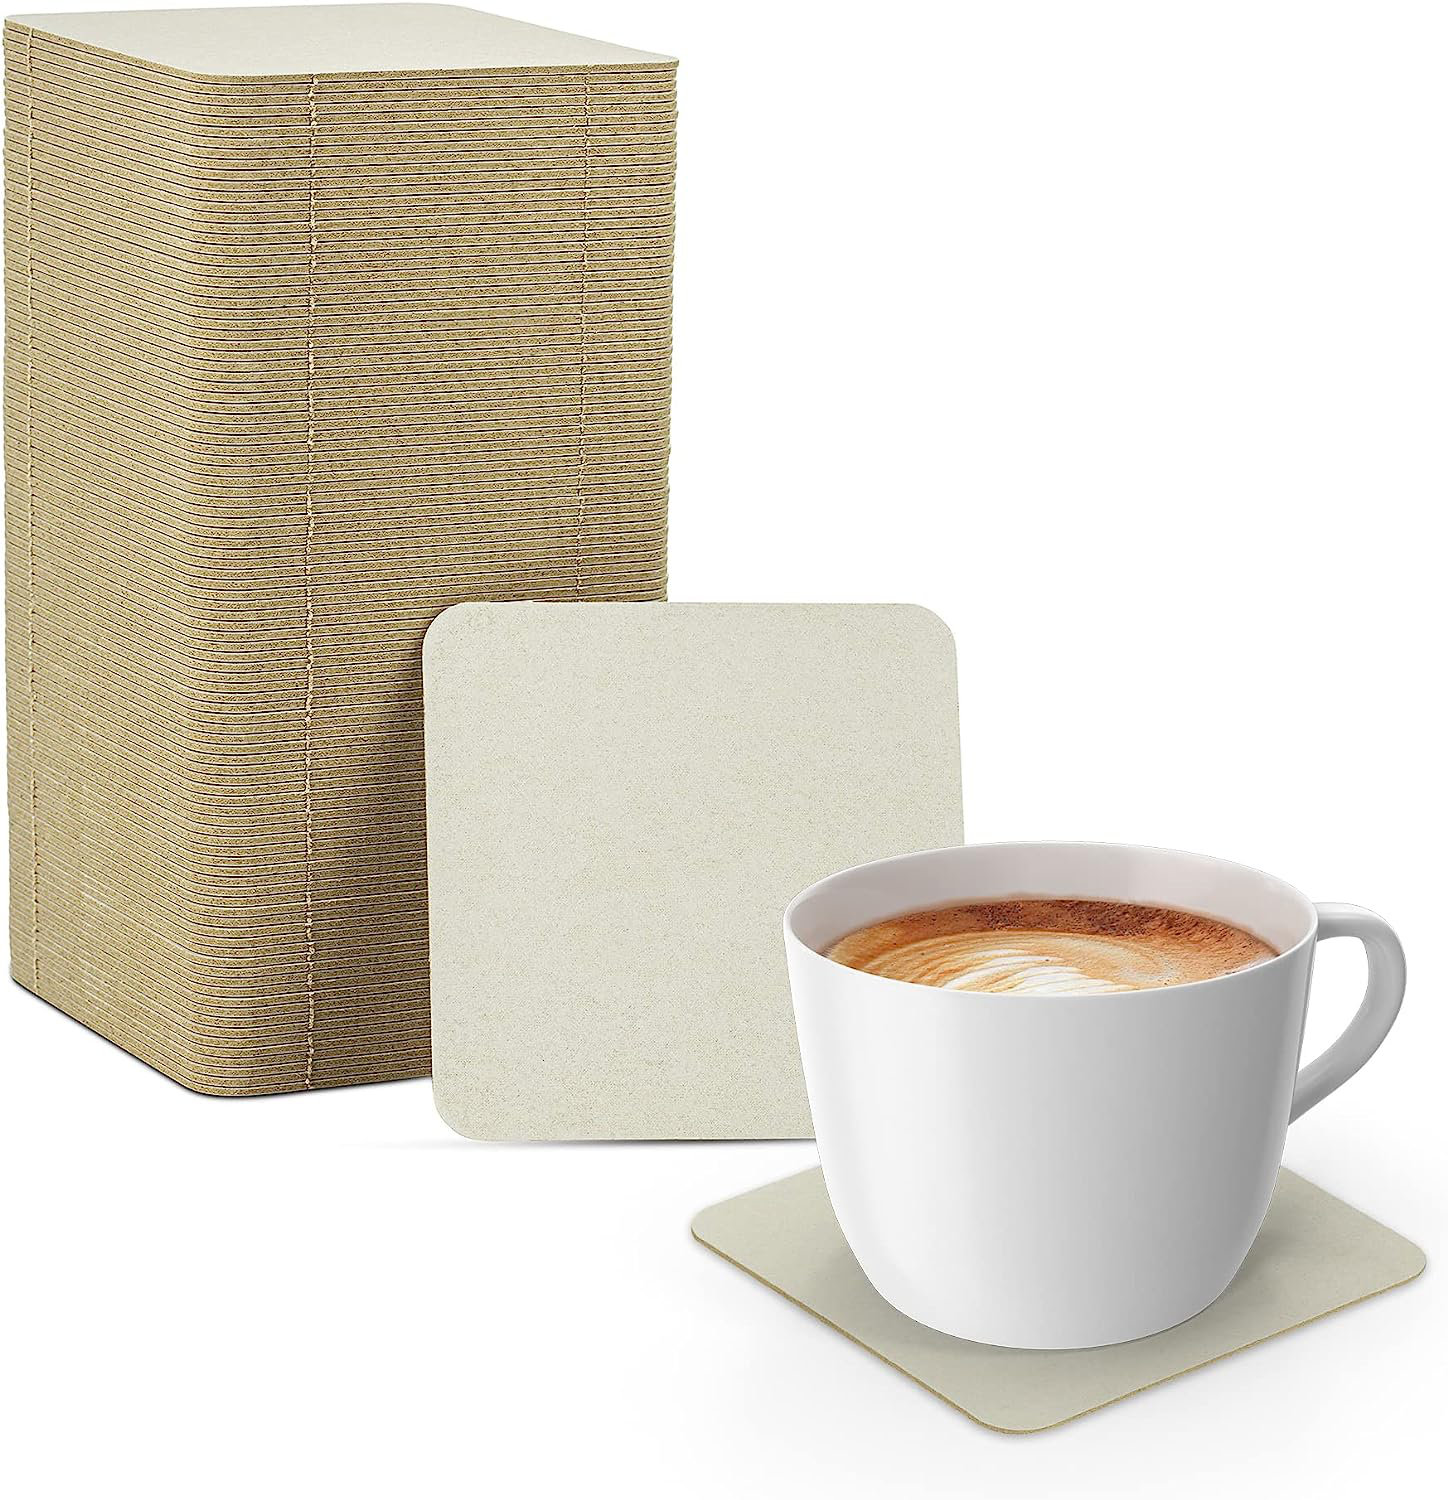 MT Products 4 White Square Blank Paper Coasters for Drinks